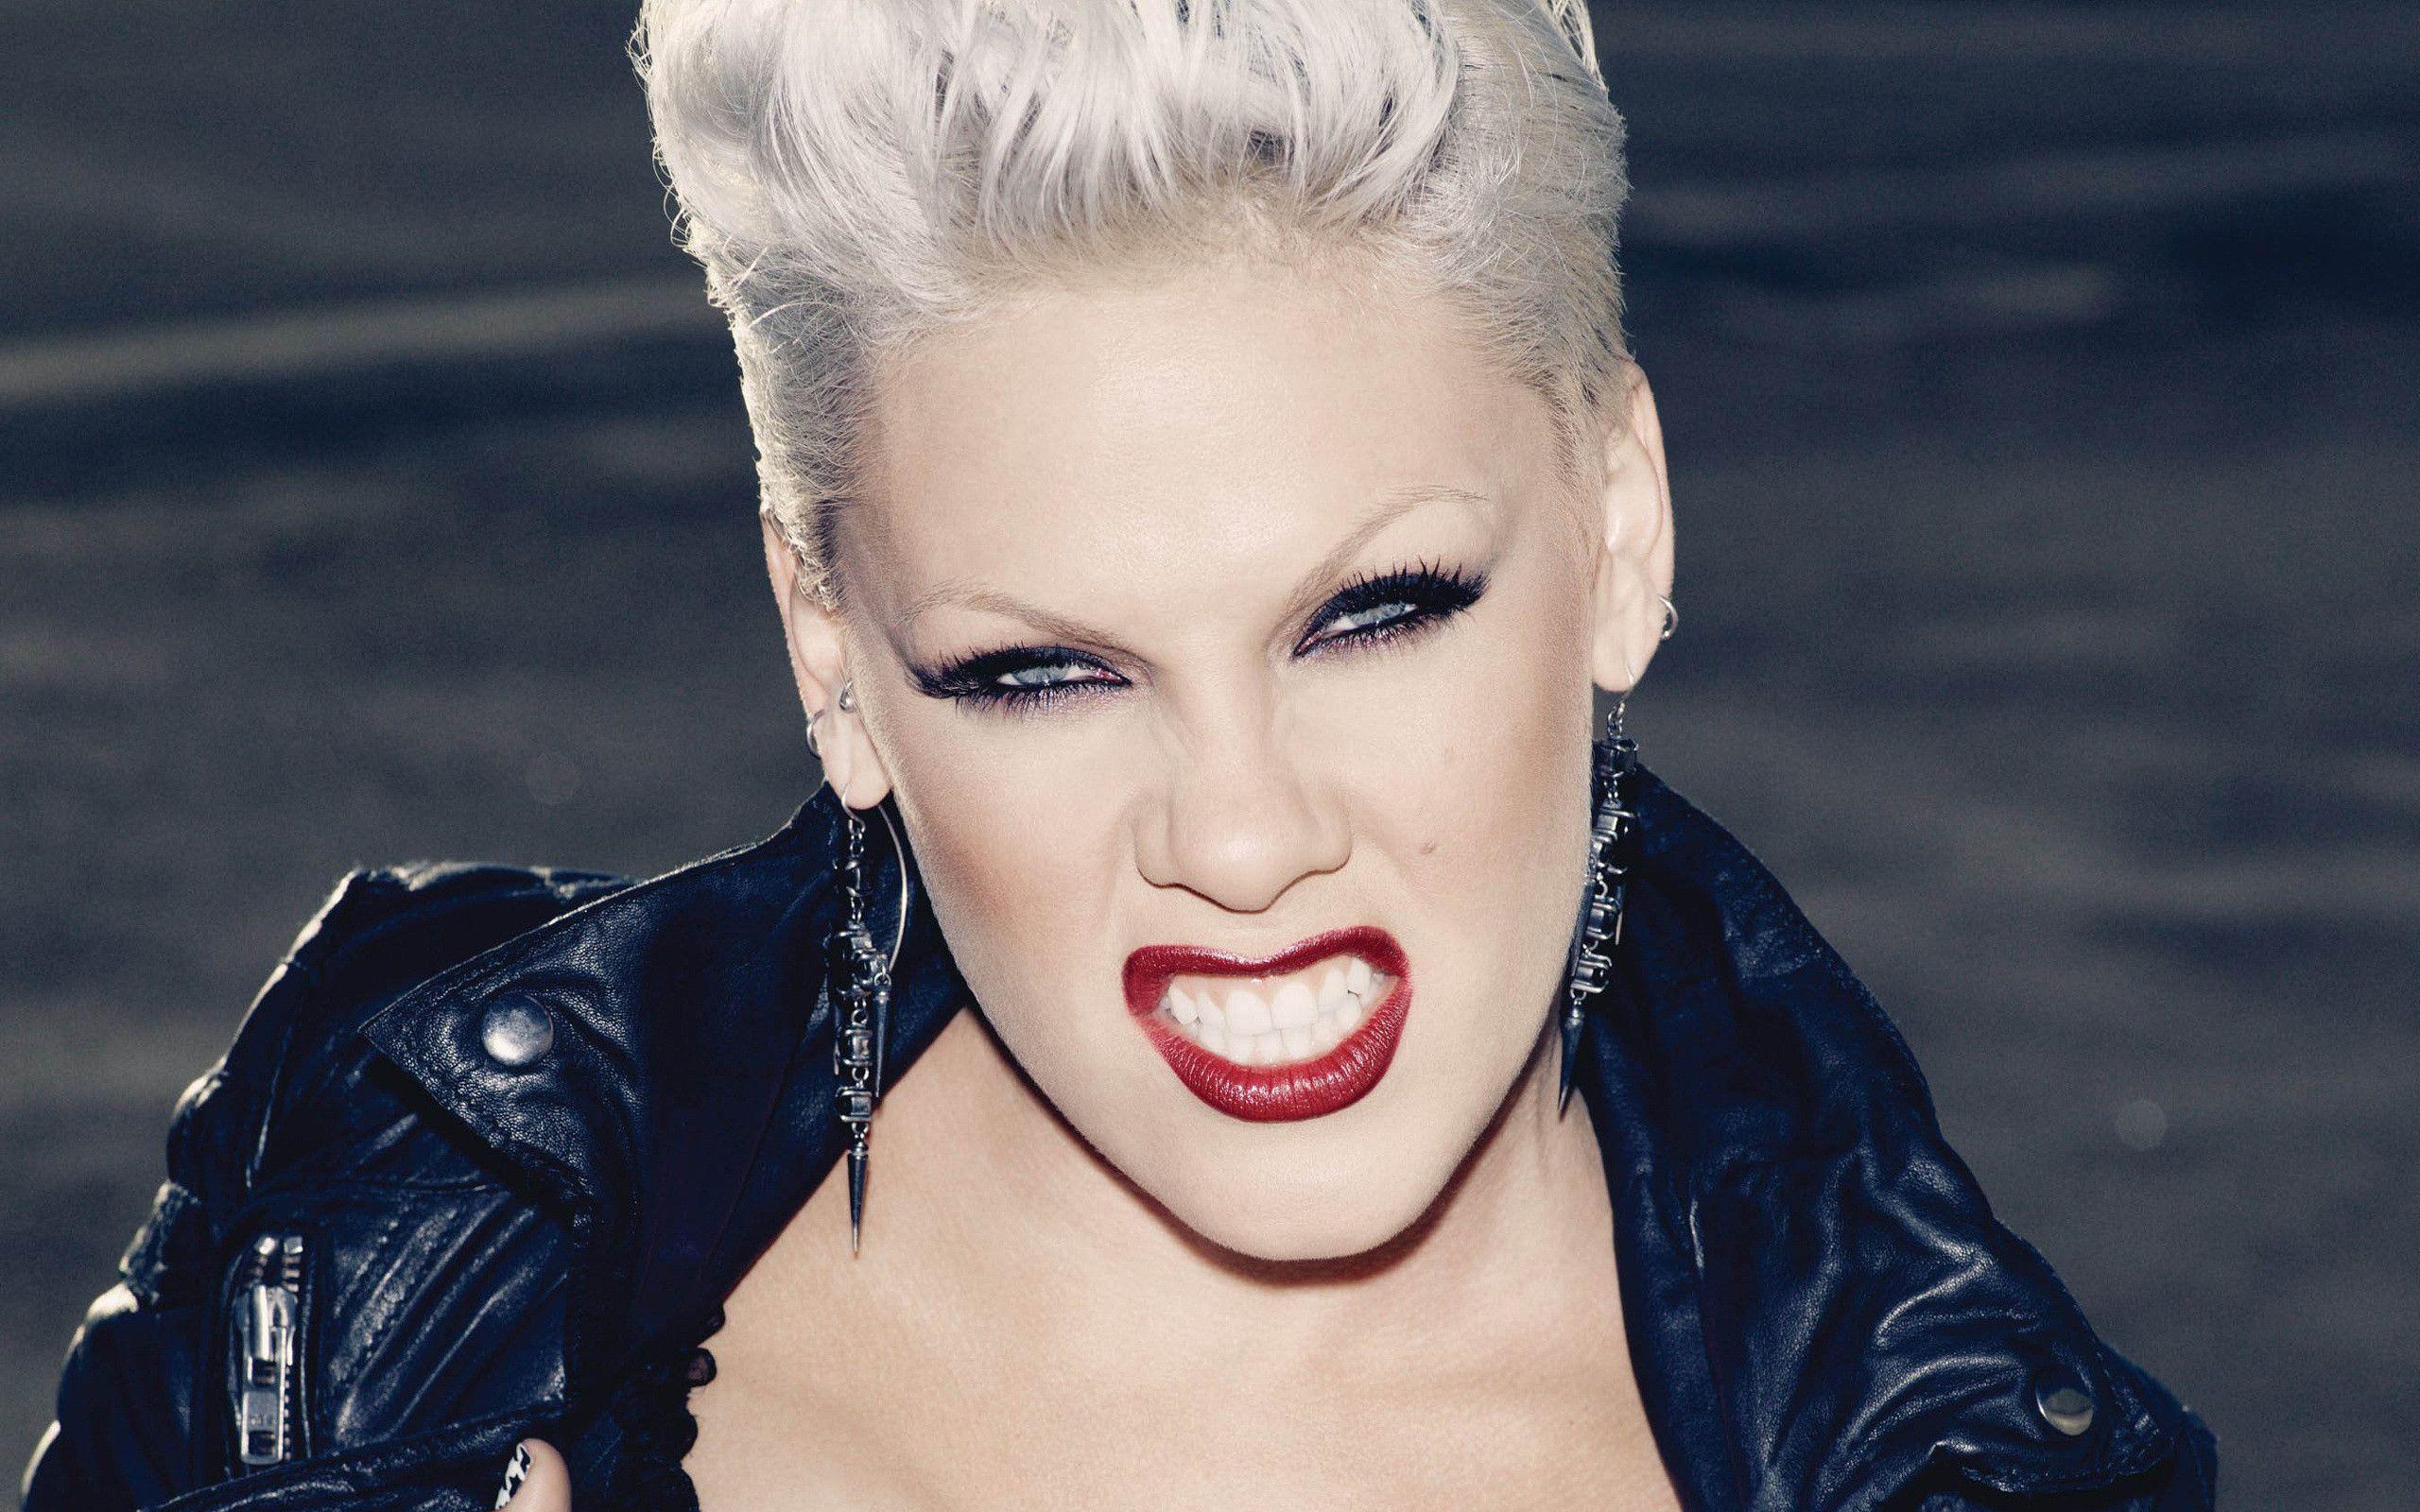 pink singer wallpaper background Search Engine